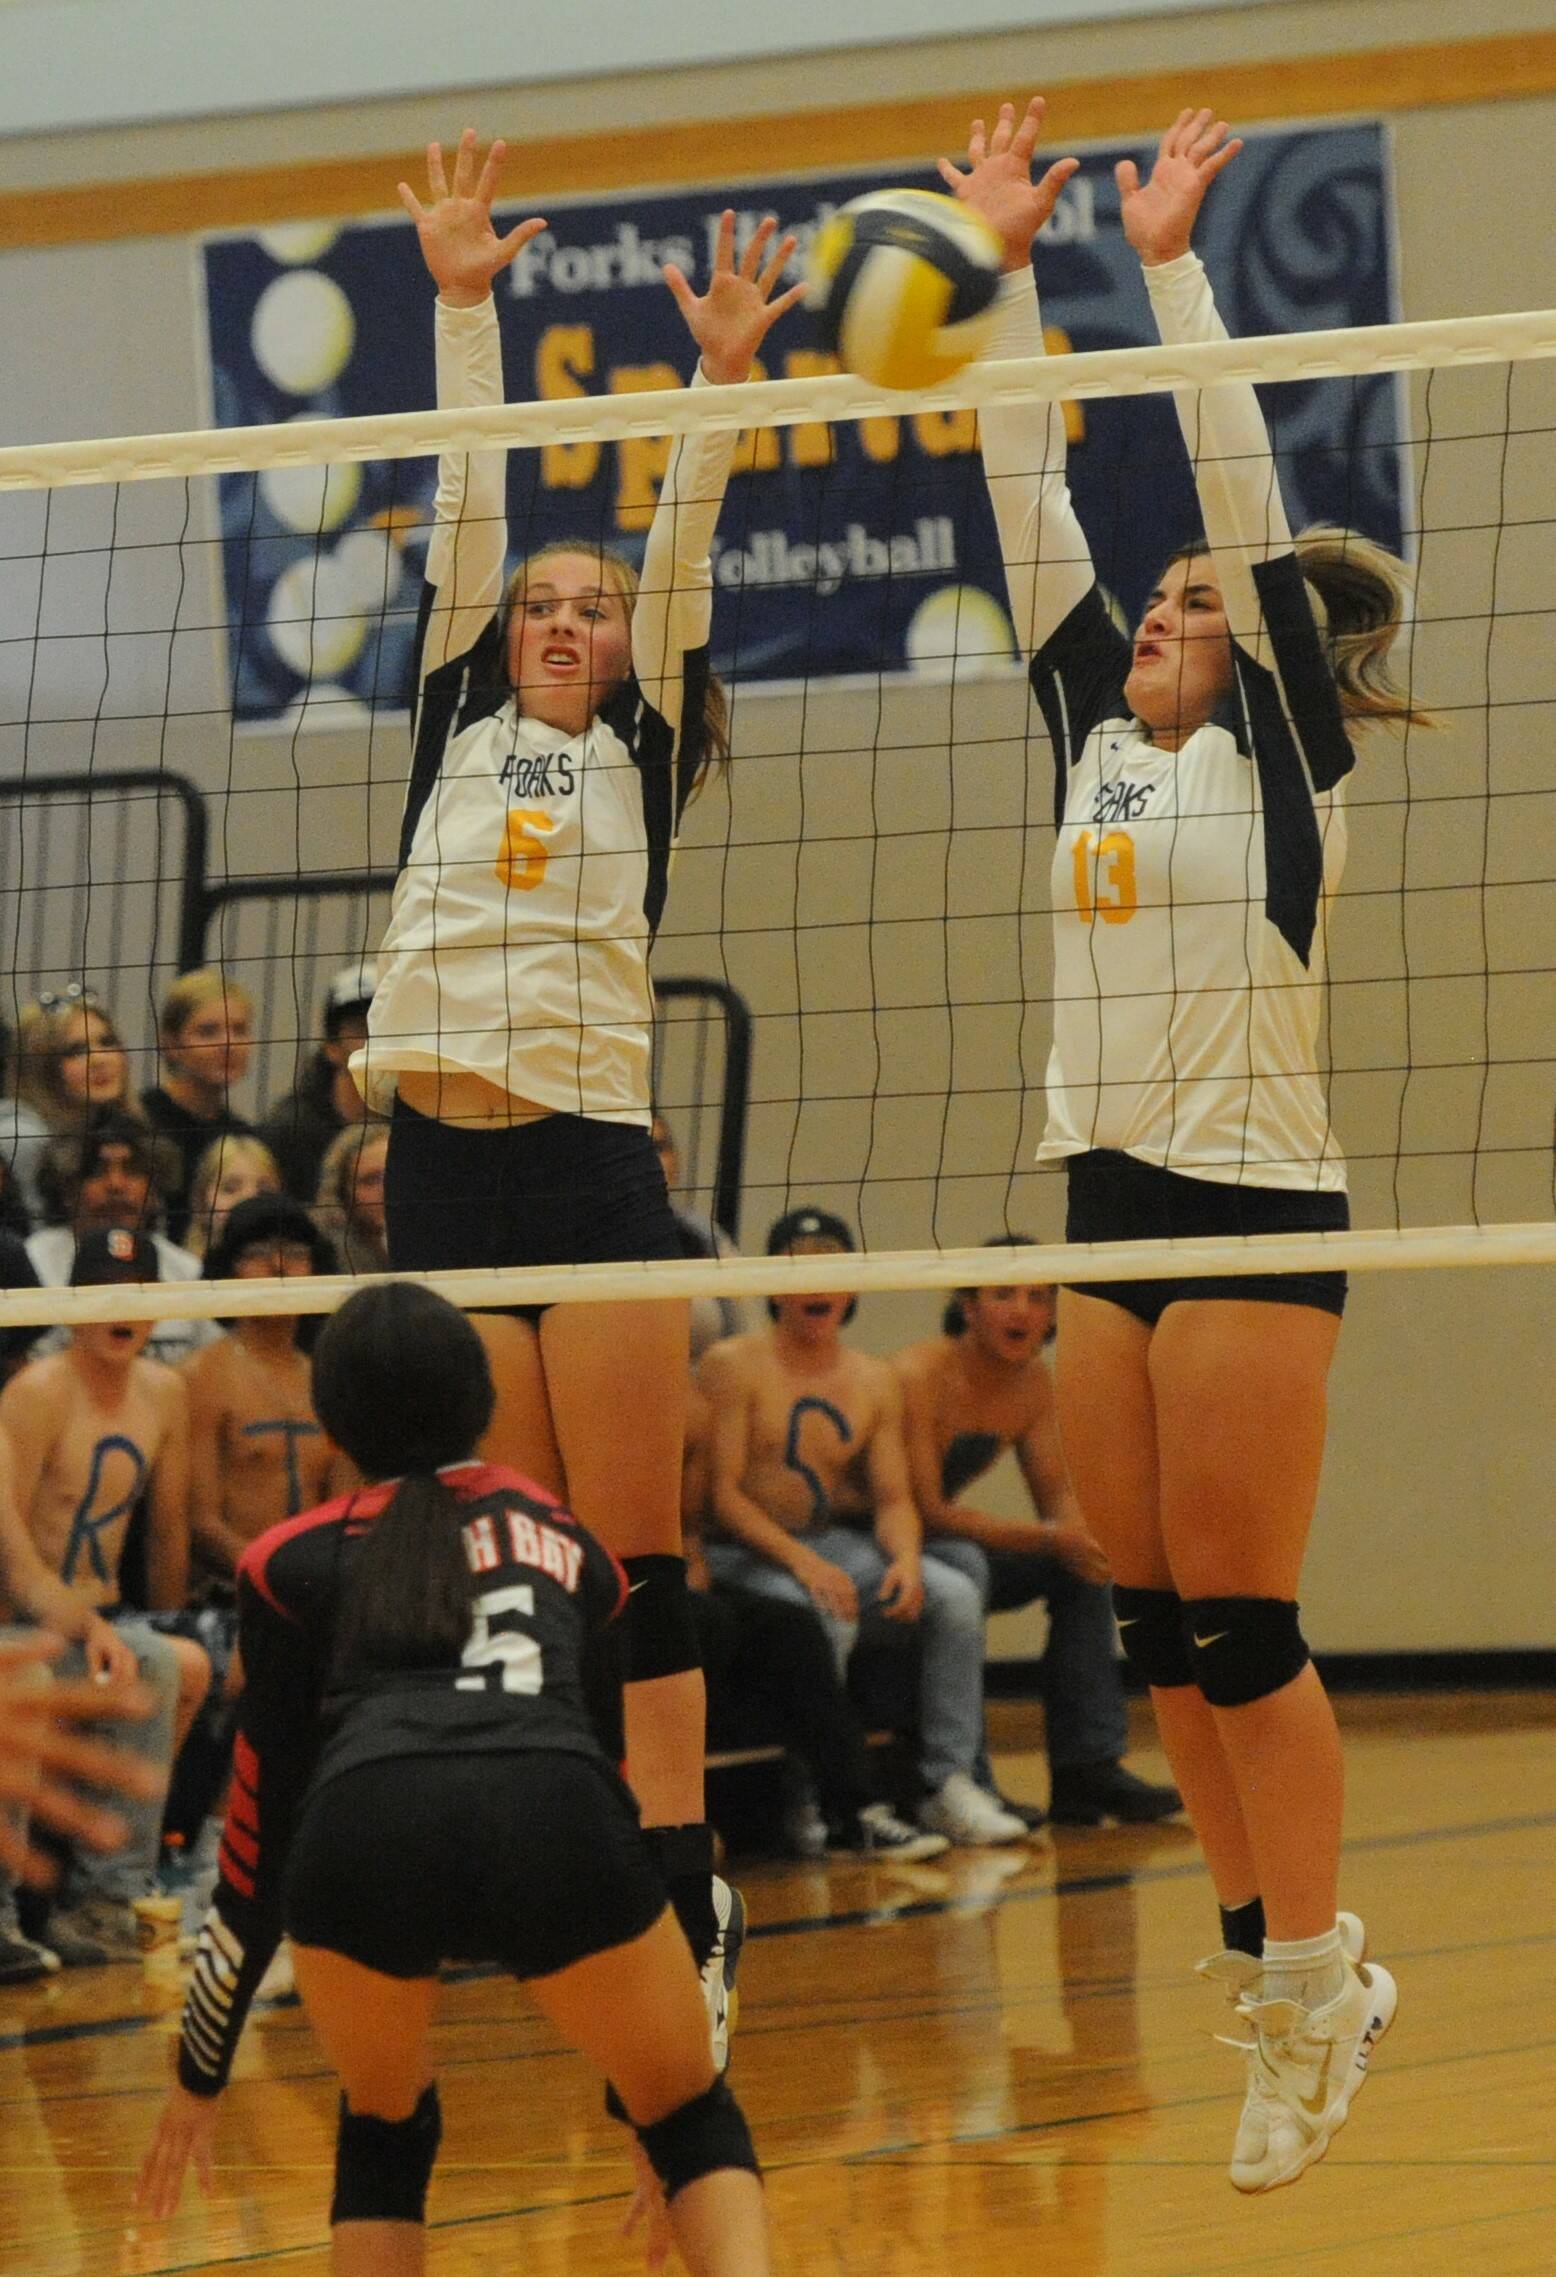 In varsity action, Spartan Chloe Gaydeski-St John (6) and Kaidence Rigby (13) go for the block while a large group of rowdy Spartan rooters look on from the stands.